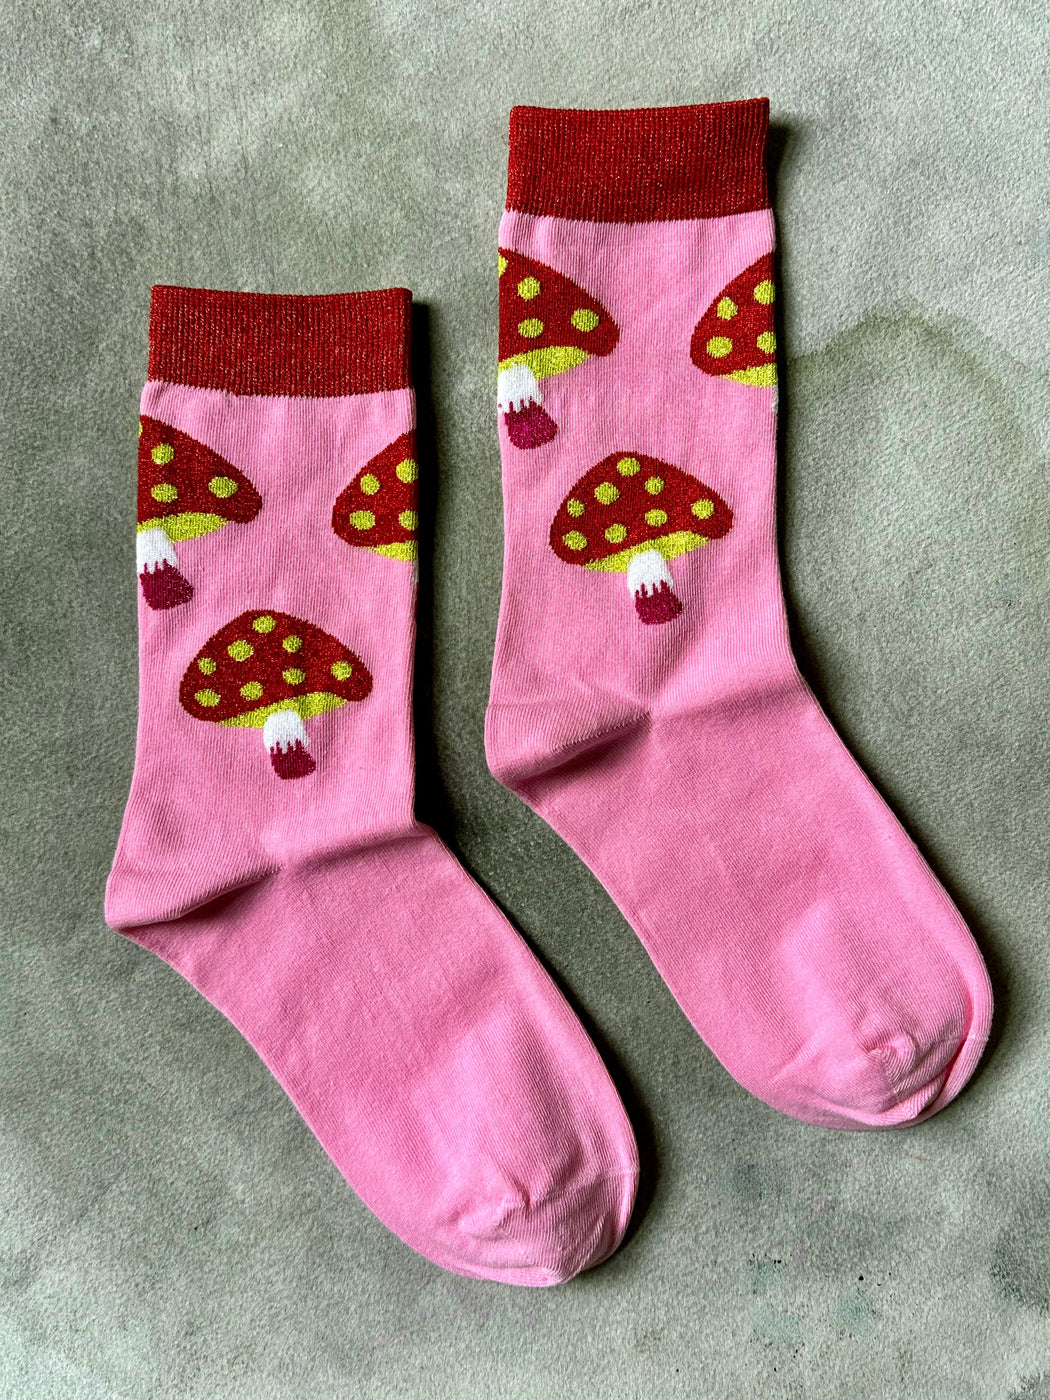 "Mushrooms" Socks by Centinelle